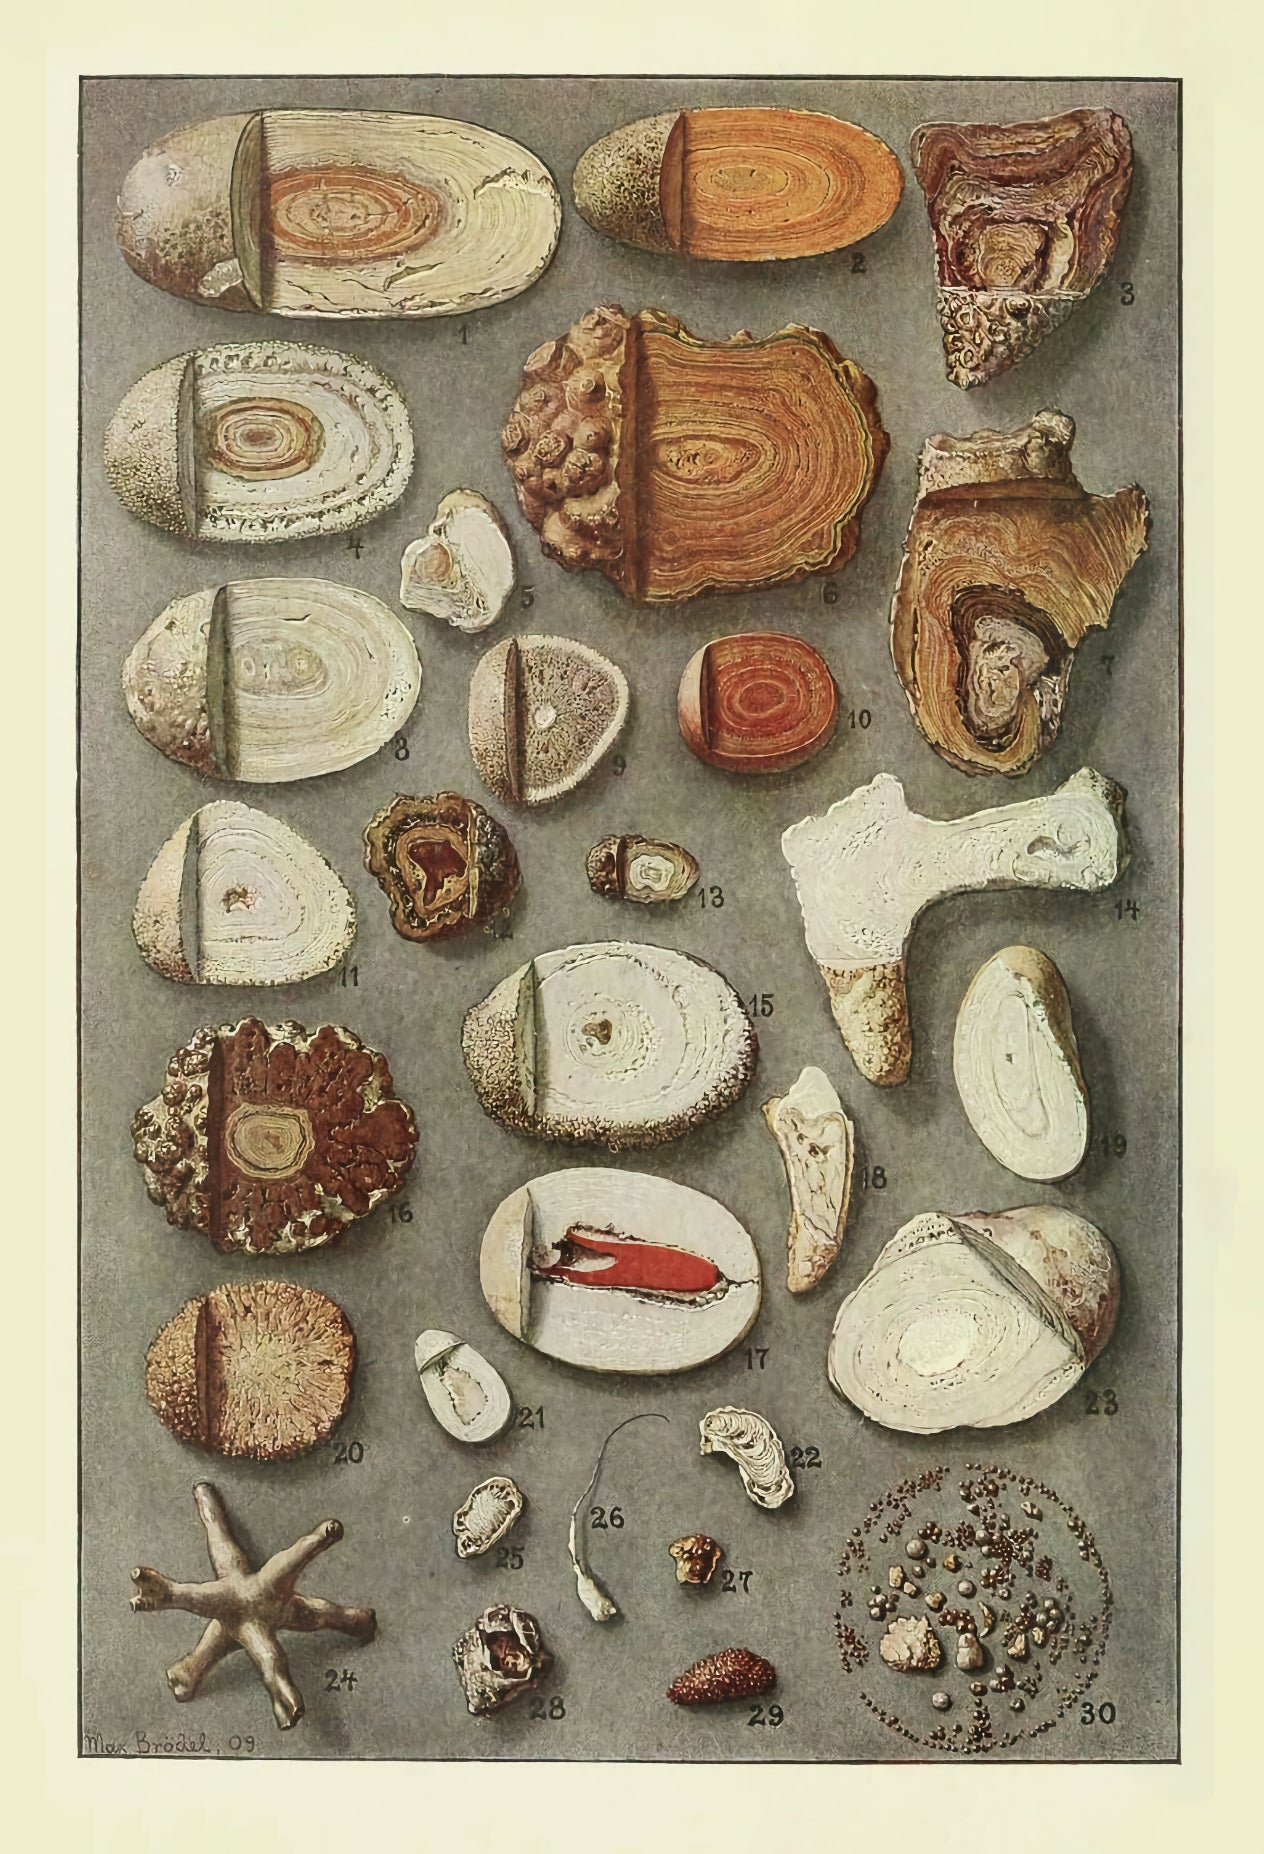 Kidney and Bladder Stones by Max Brödel, 1909 - Postcard